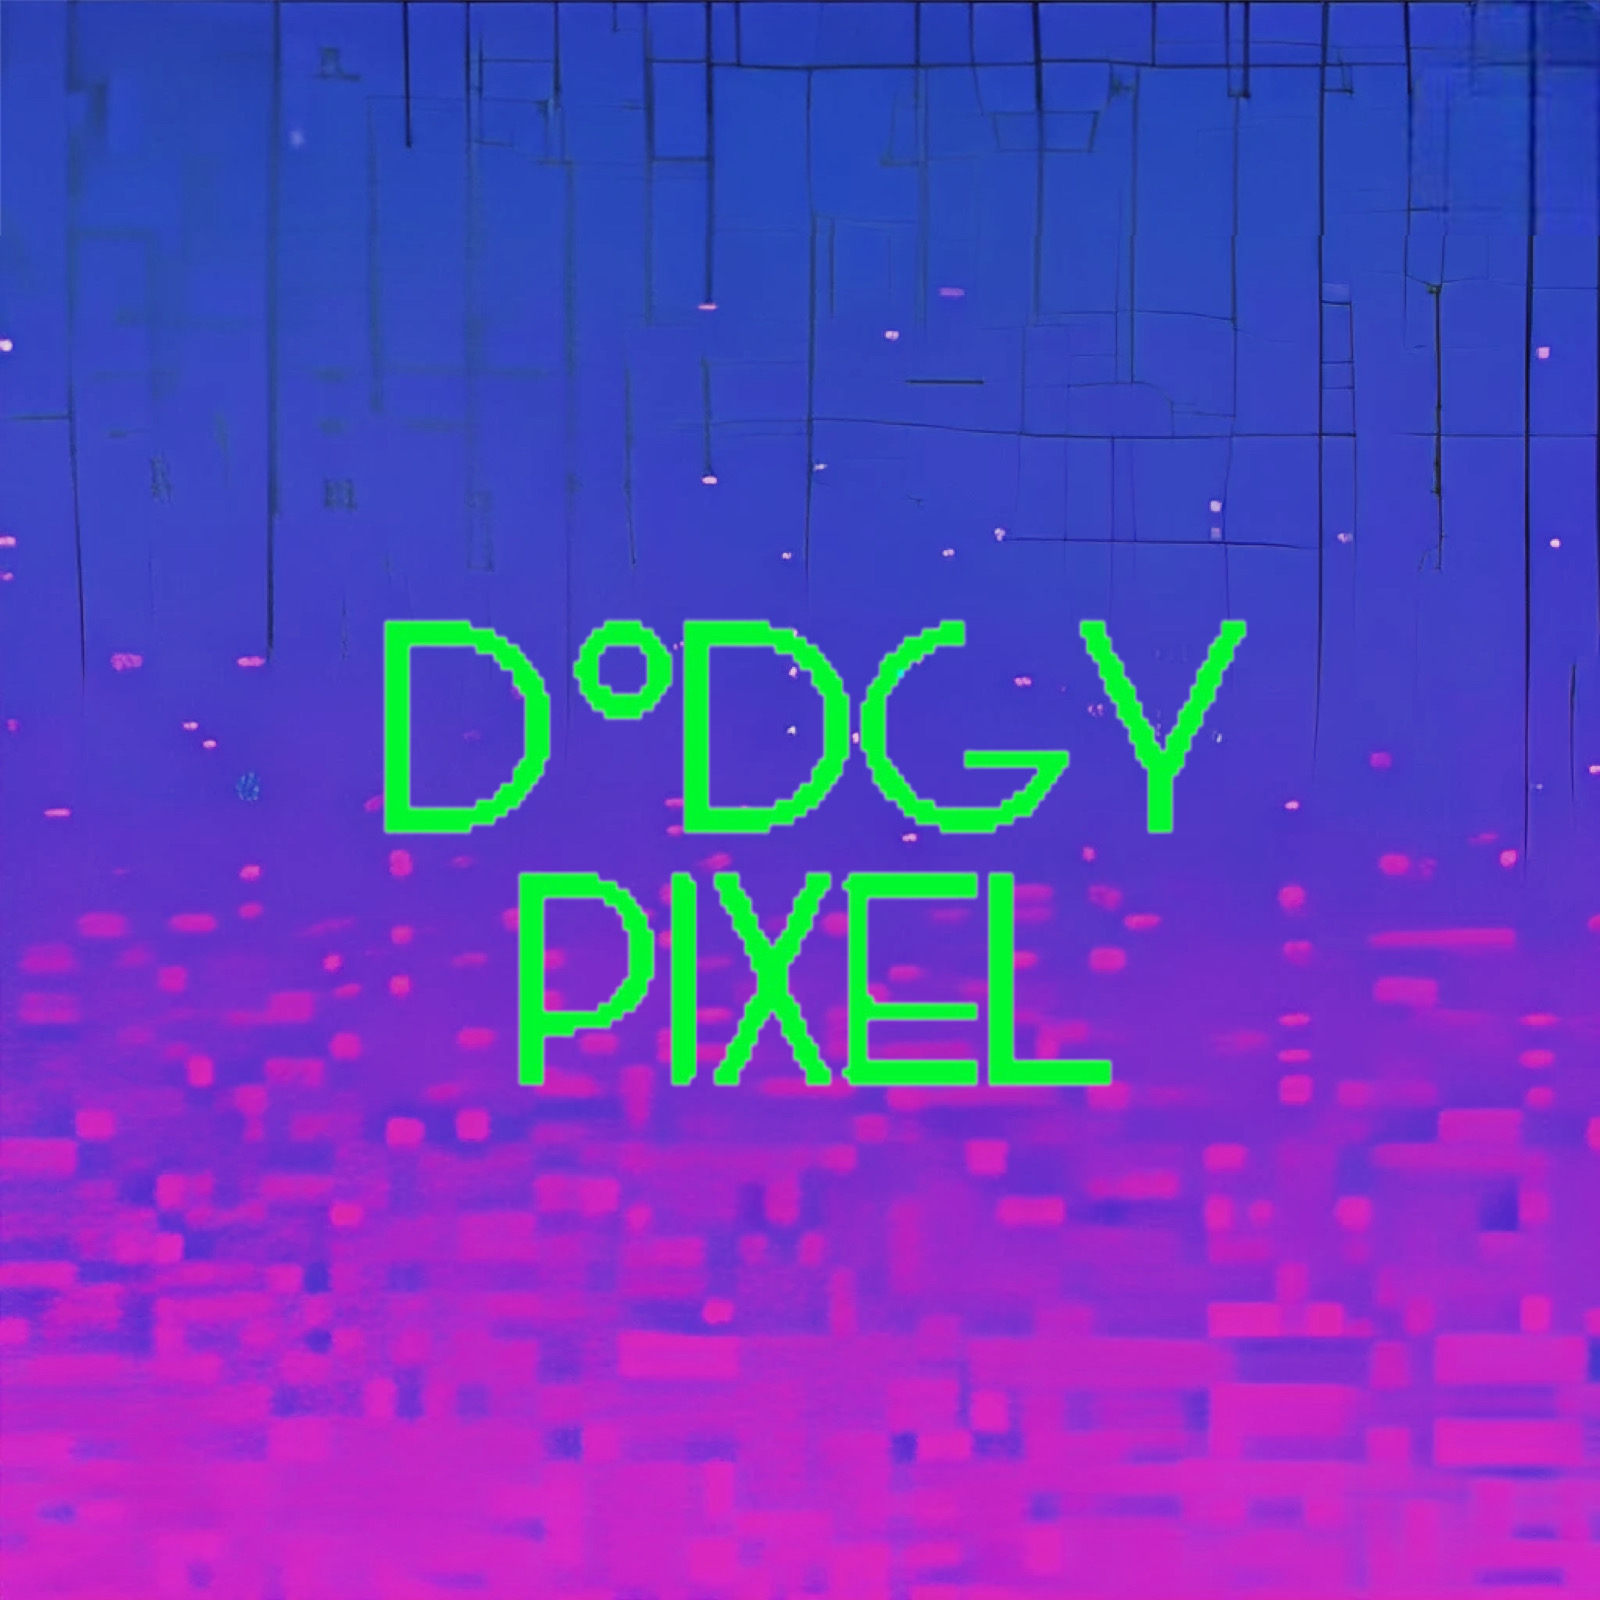 Dodgy Pixel Logo. Green pixelated text that says 'Dodgy Pixel' on a purple and blue gradient of broken pixles.